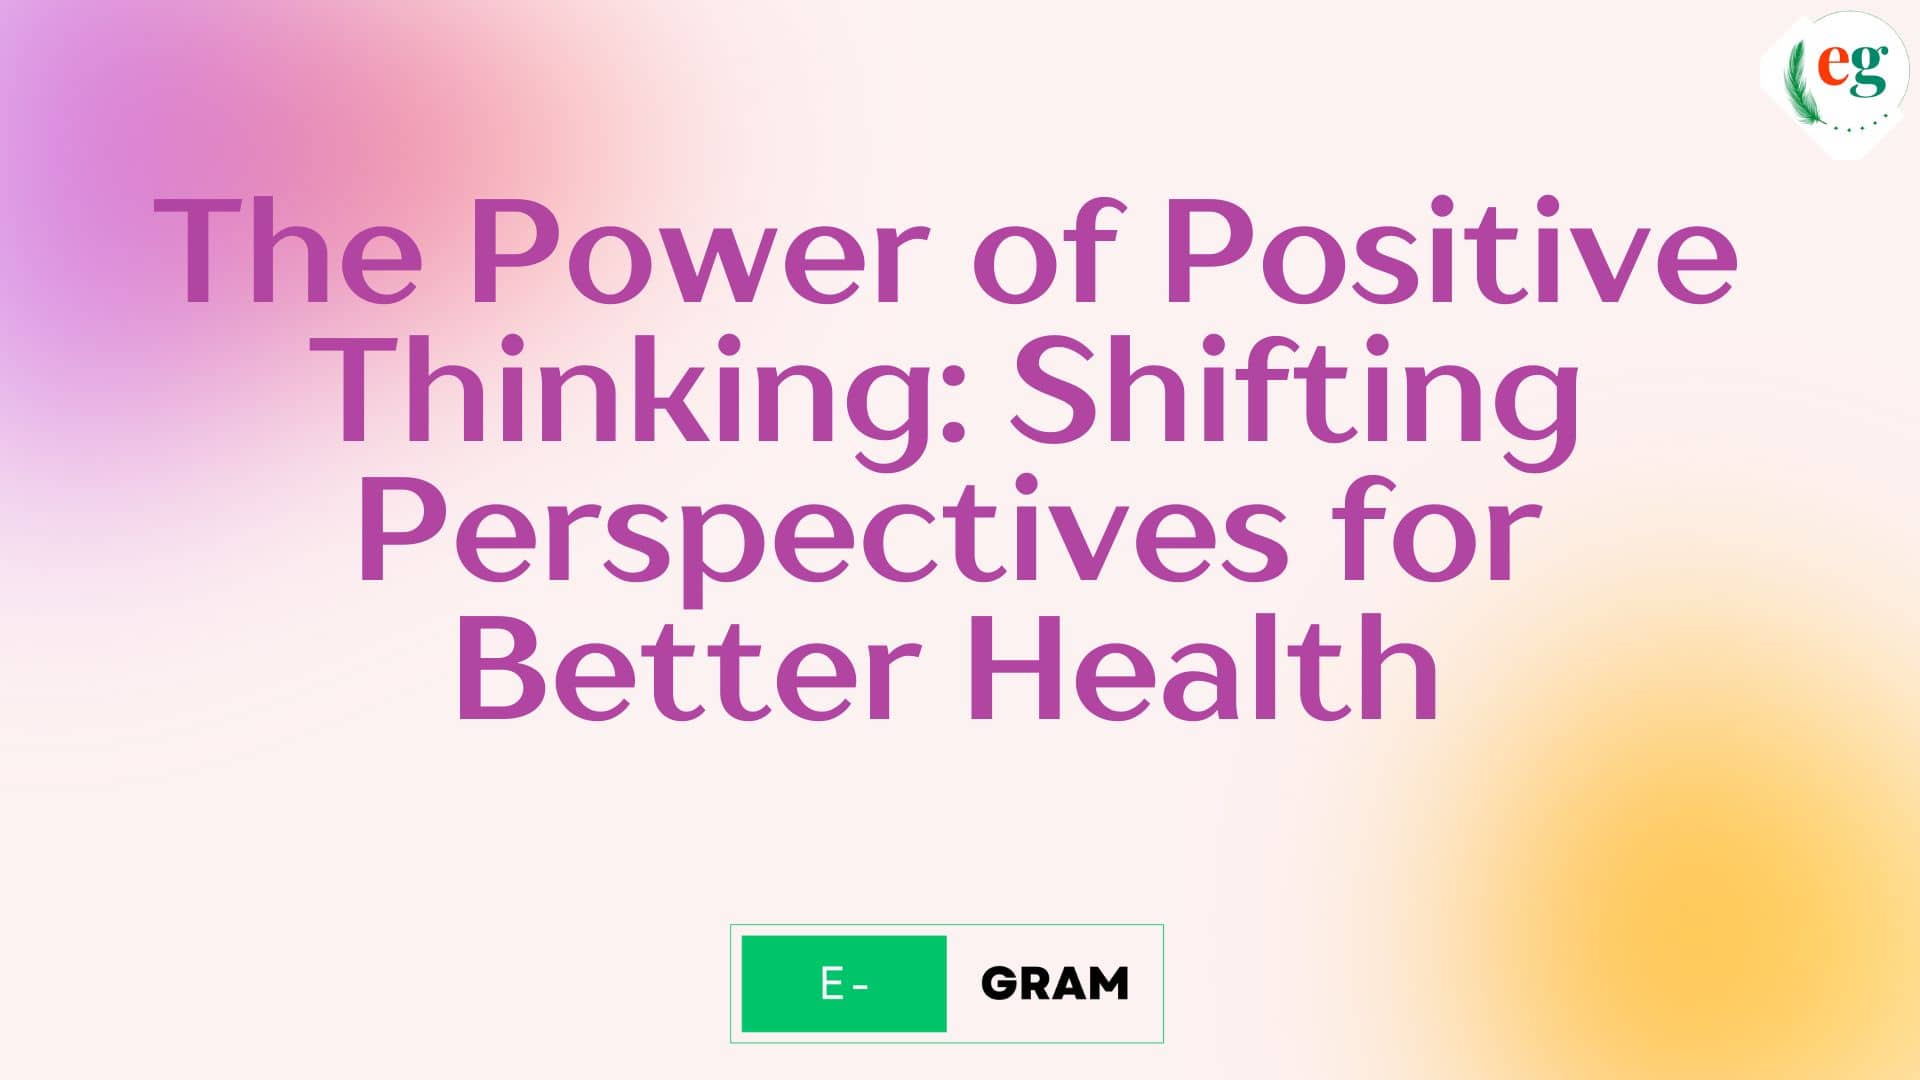 The Power of Positive Thinking: Shifting Perspectives for Better Health